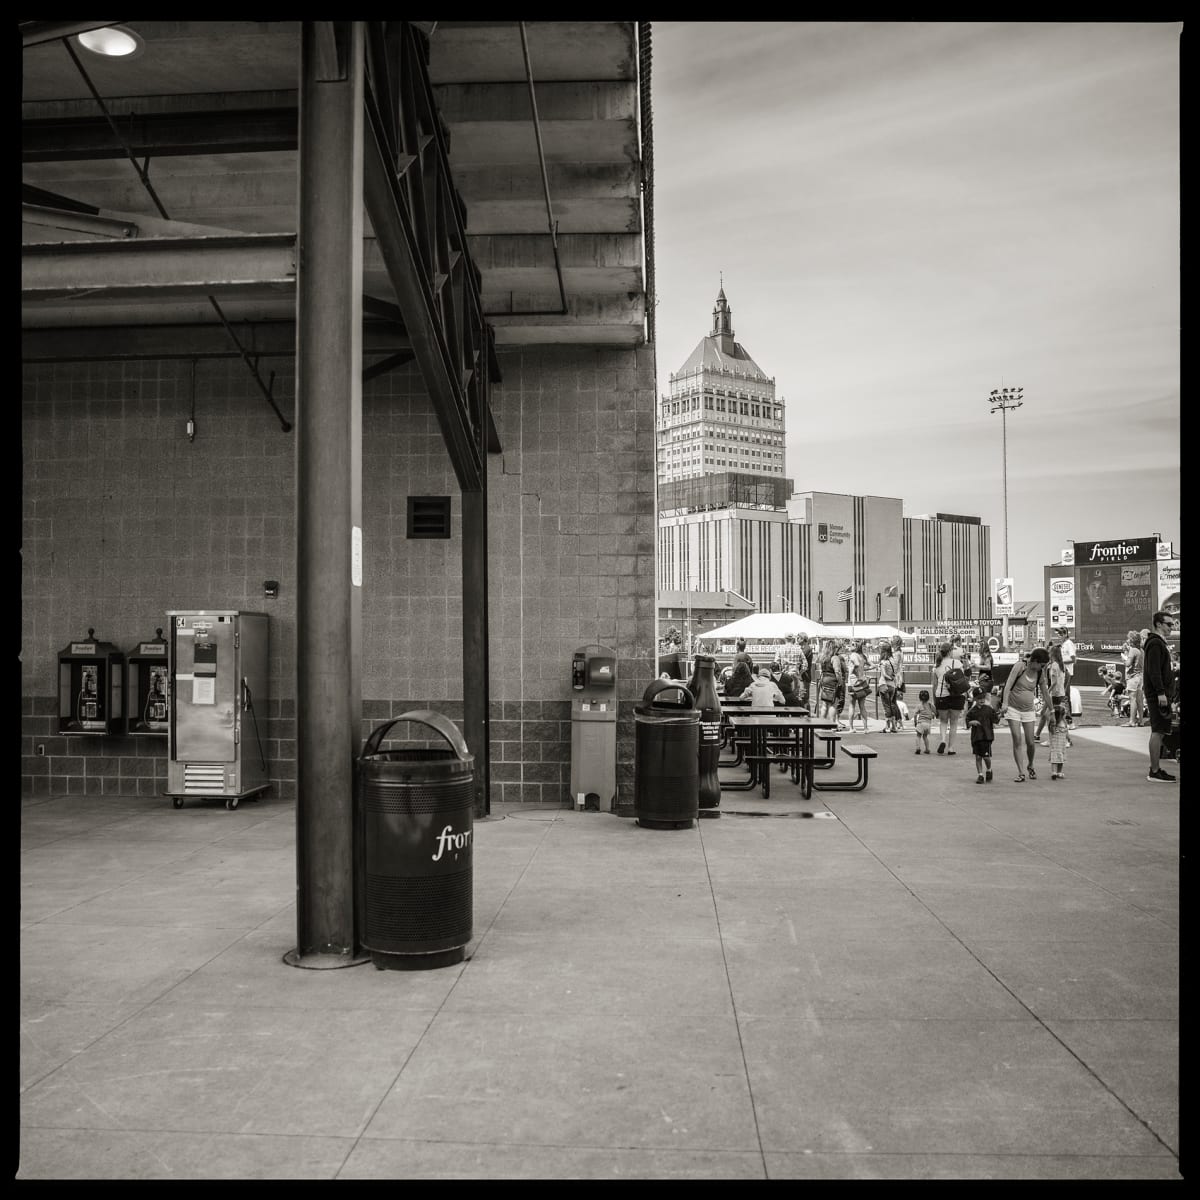 585.232.9882 & 585.232.9300 – Frontier Field, 333 N. Plymouth Avenue, Rochester, NY 14608 by Eric T. Kunsman  Image: ID: A black and white image shows a building overhang on the left and on the right is the Kodak tower and other buildings surrounding it and people in the foreground. Under the building overhang there are two payphones and a garbage can.